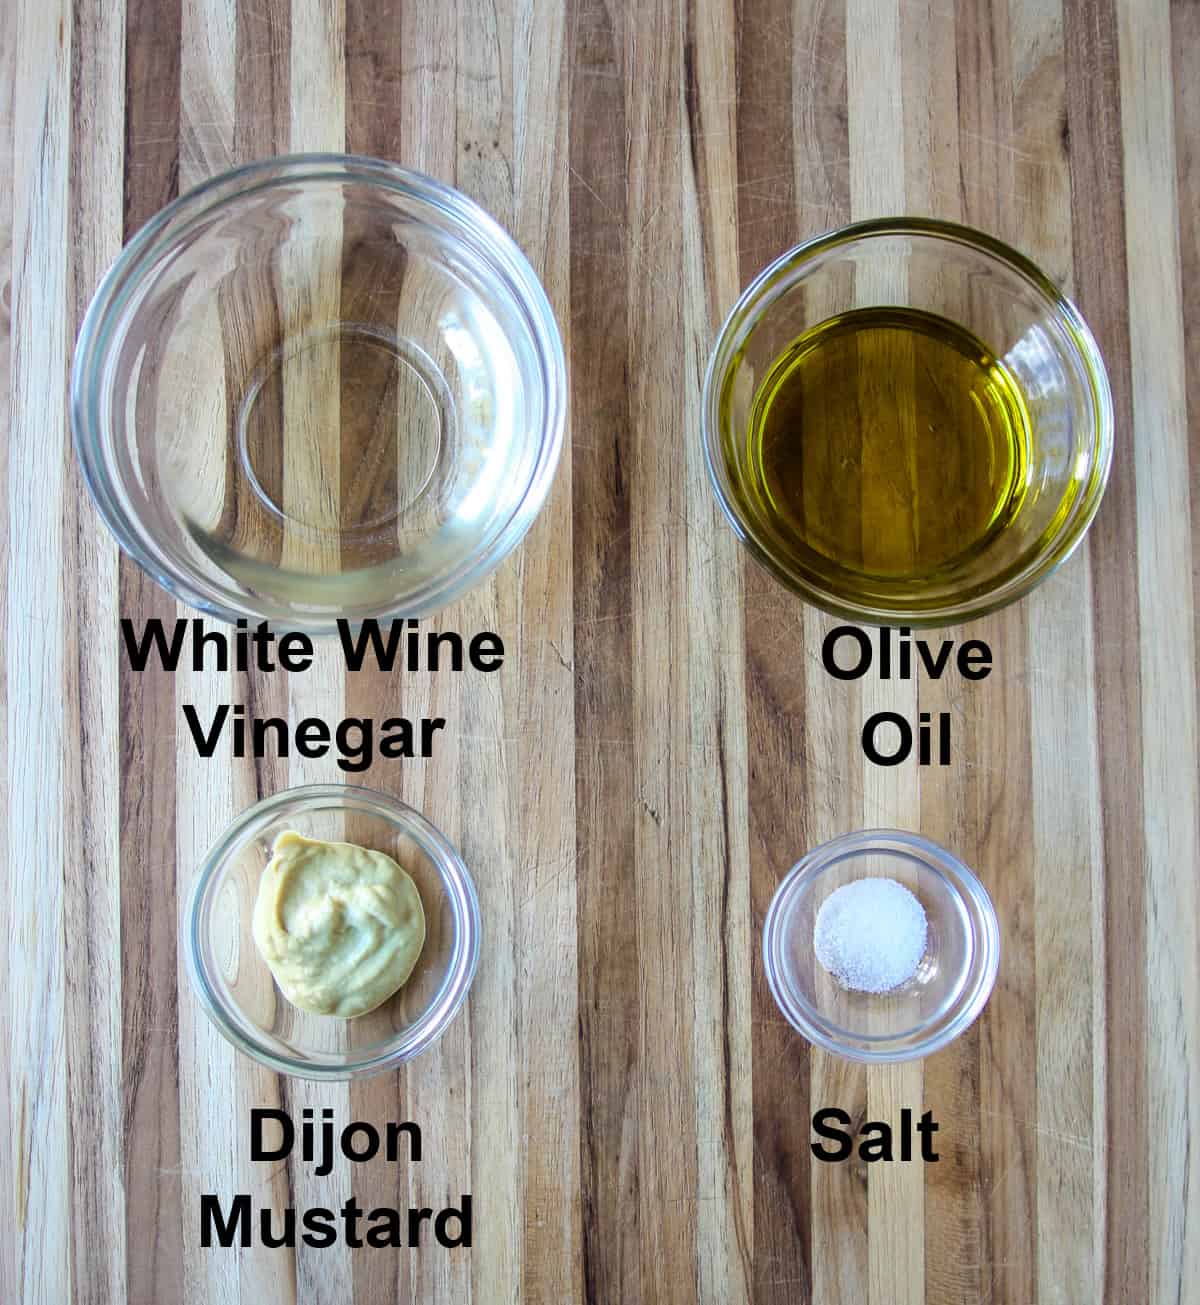 The ingredients for the salad dressing in glass bowls, on a wooden board.